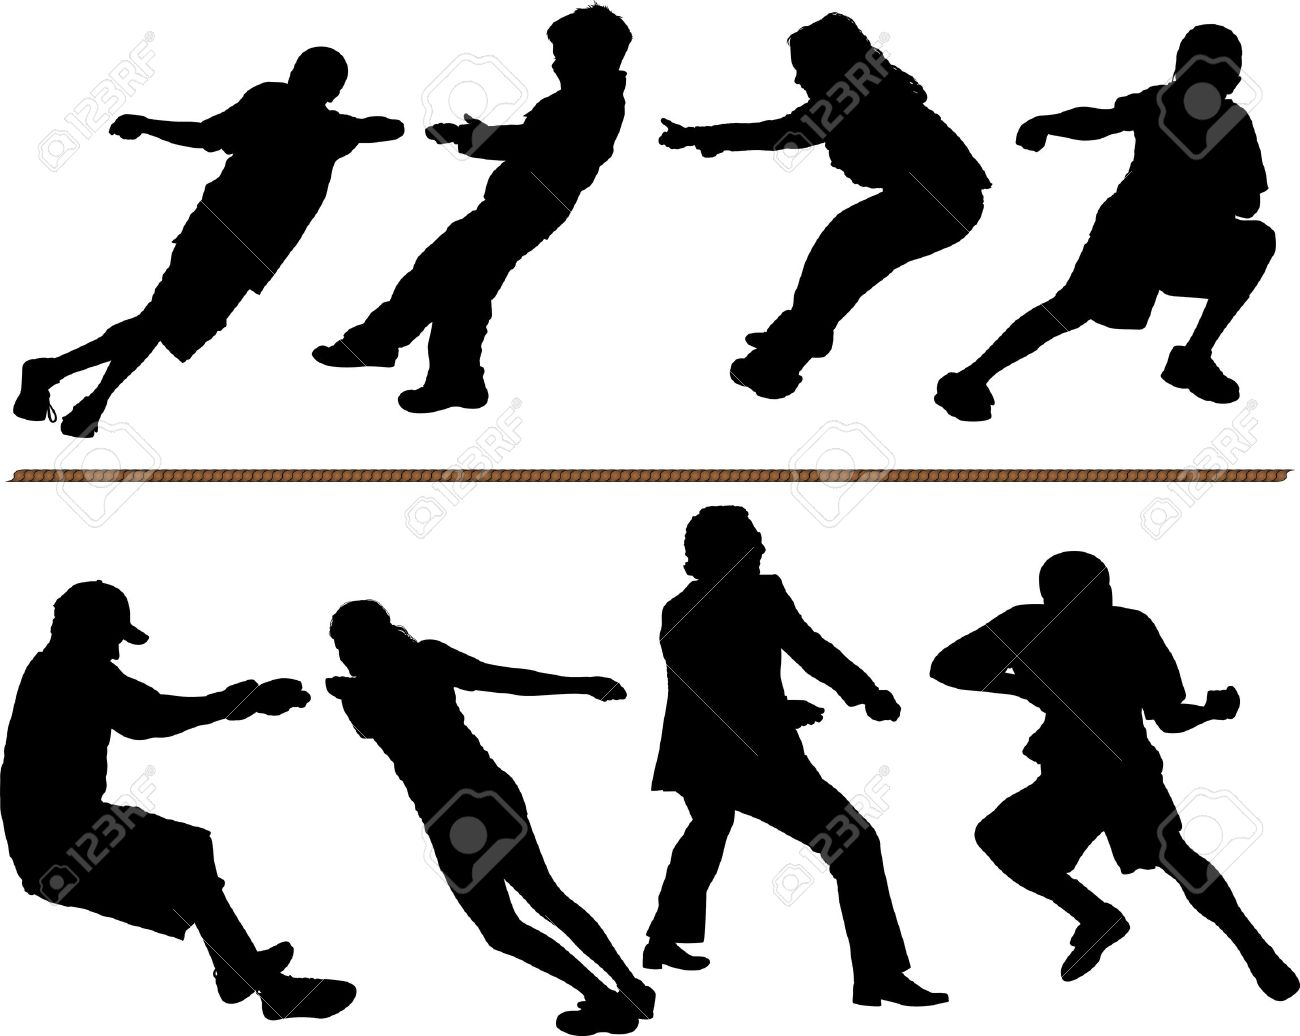 tug of war clipart images - photo #38